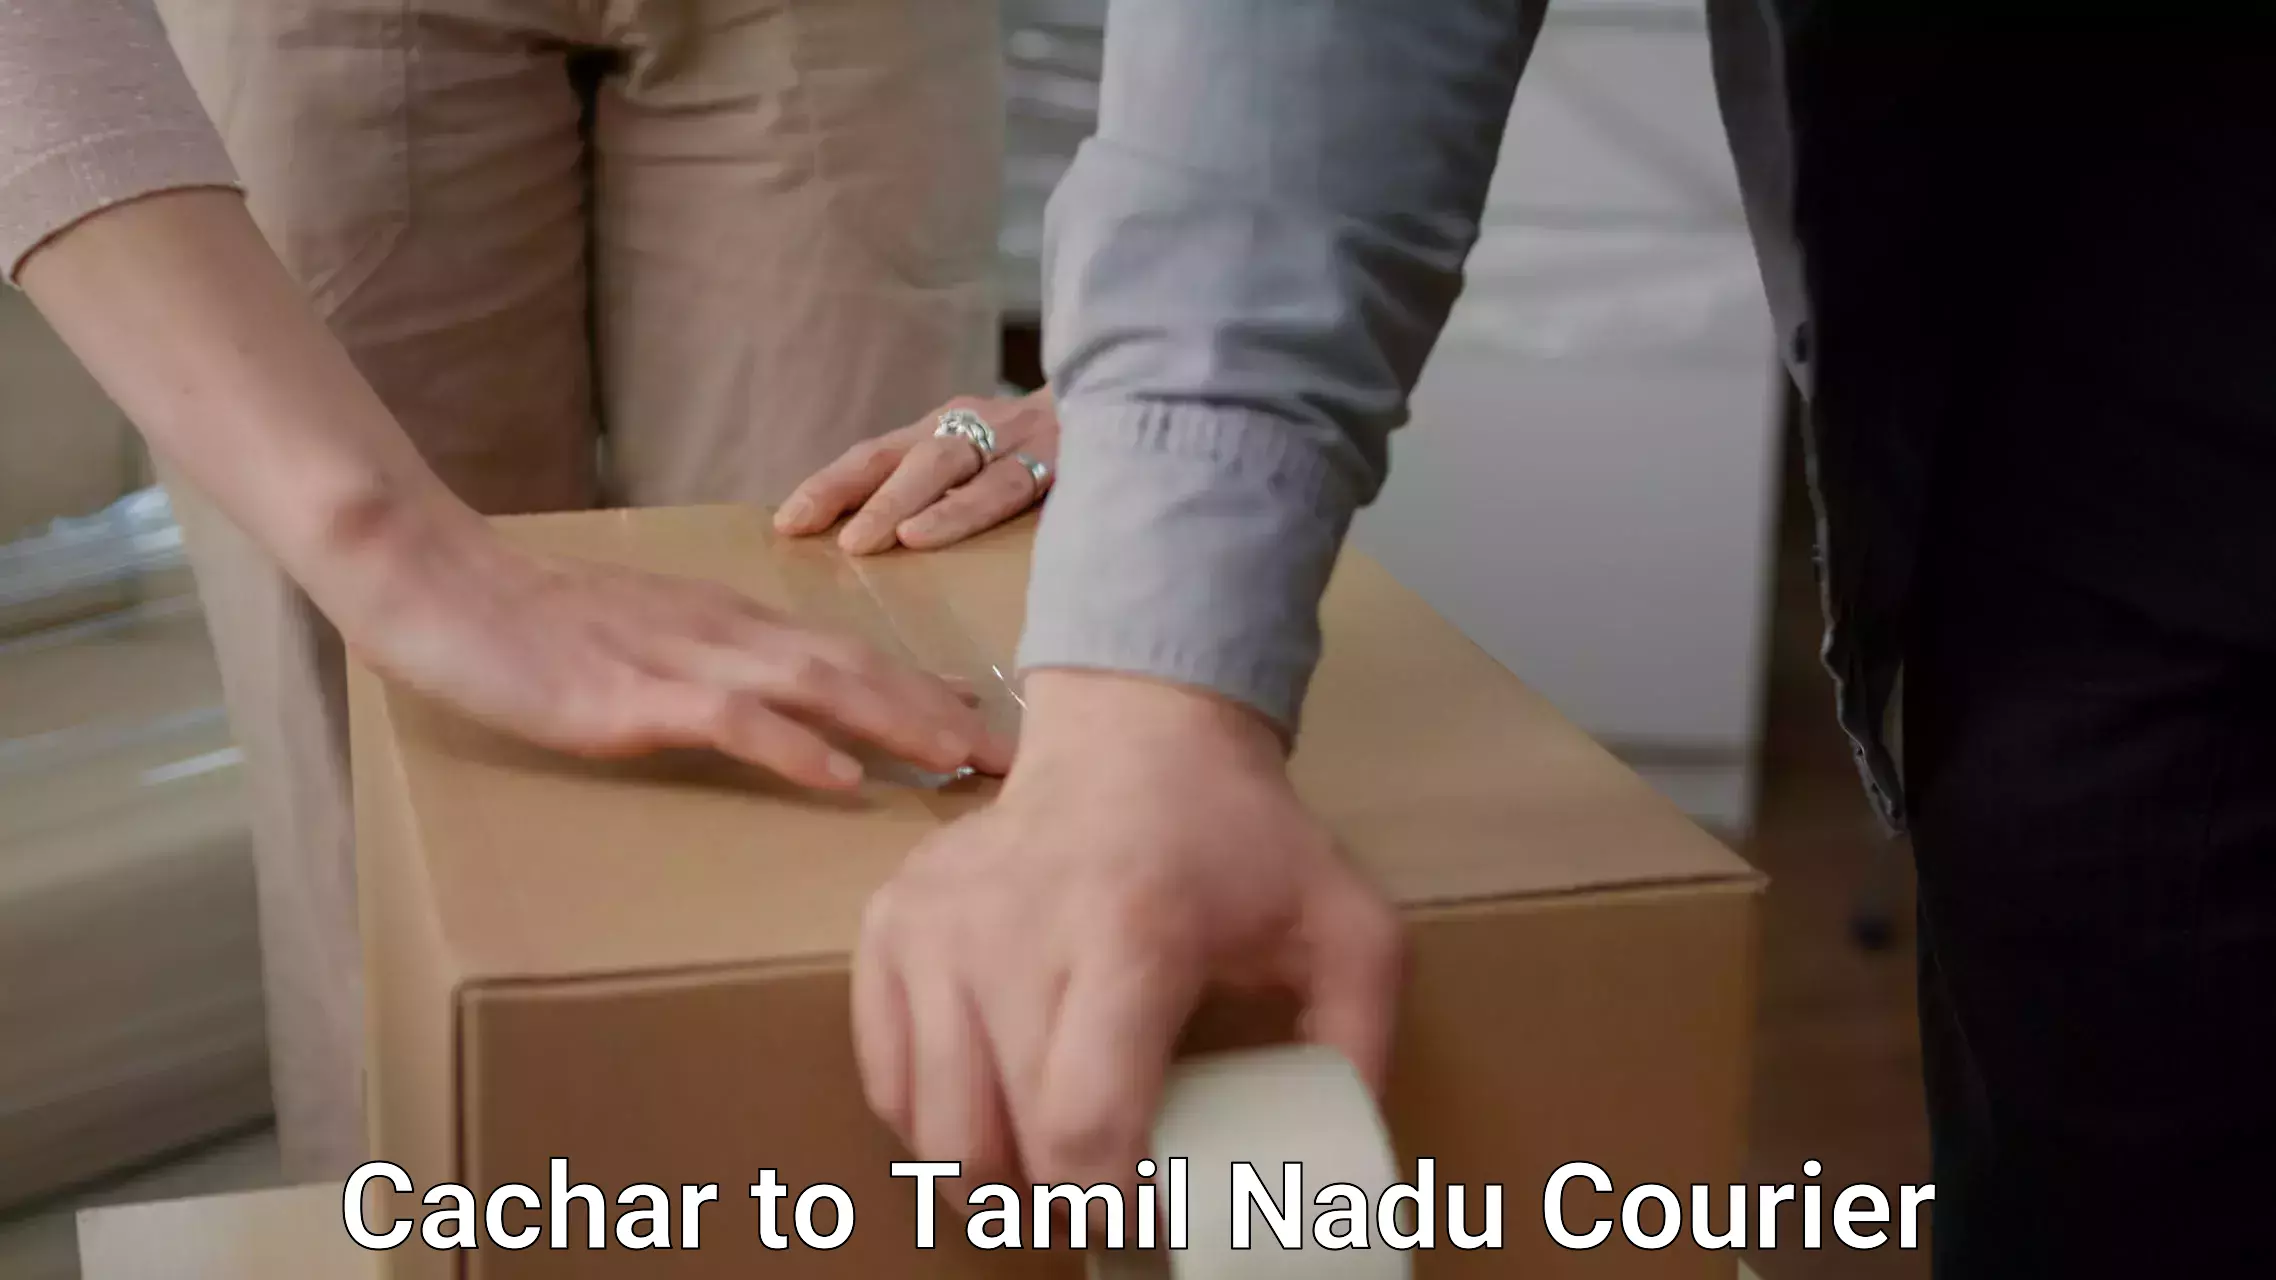 Full-service movers Cachar to Tamil Nadu